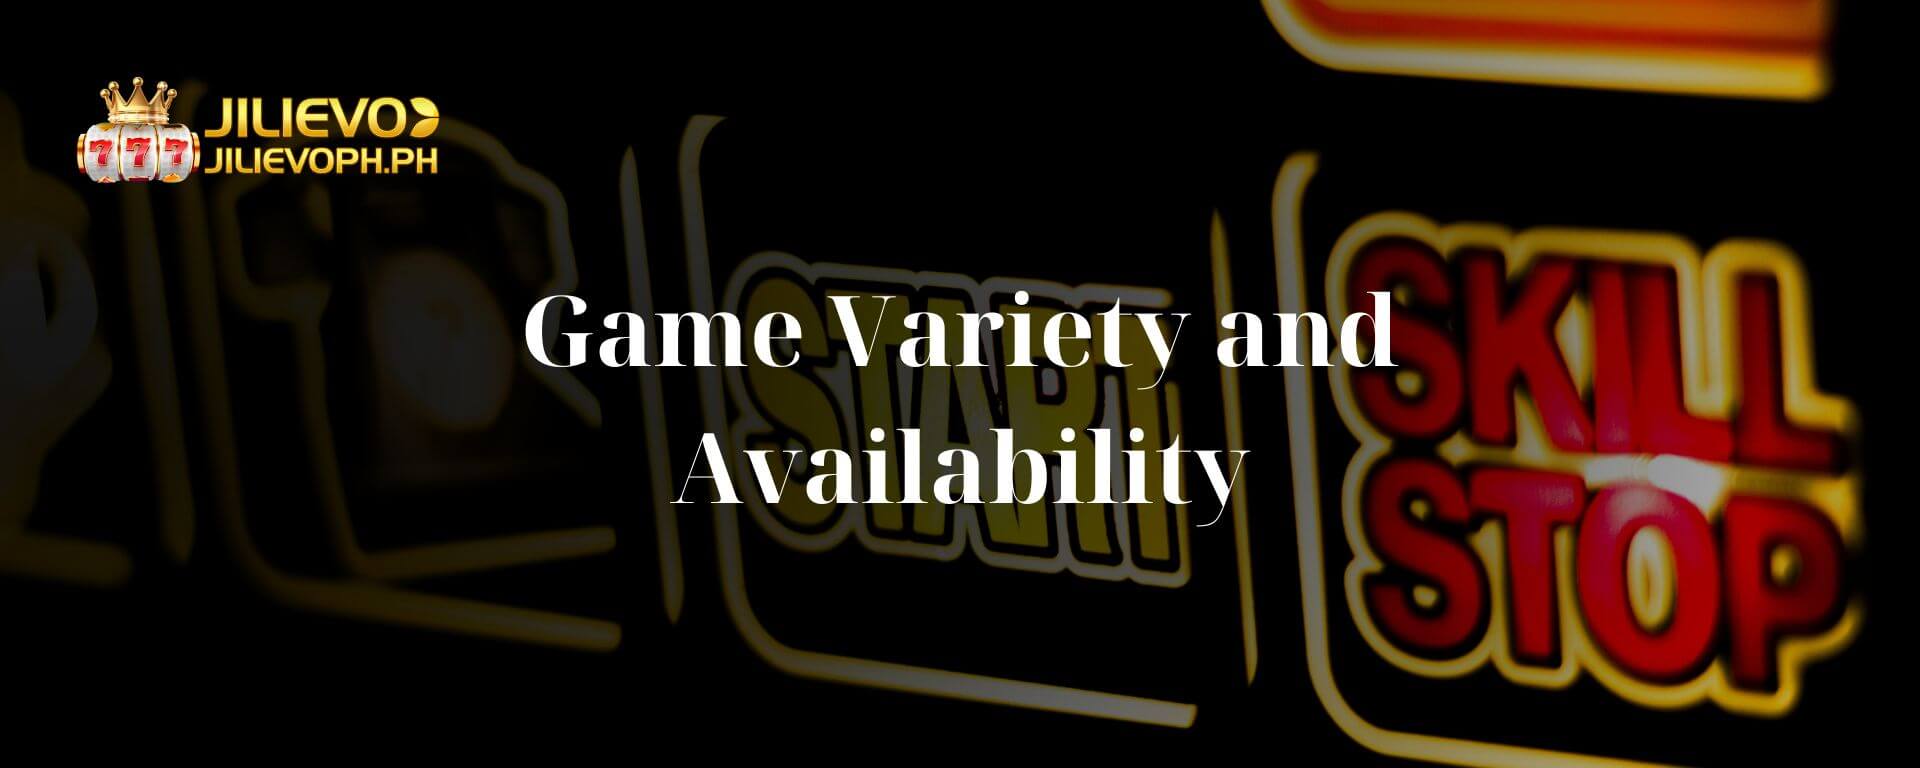 Game Variety and Availability